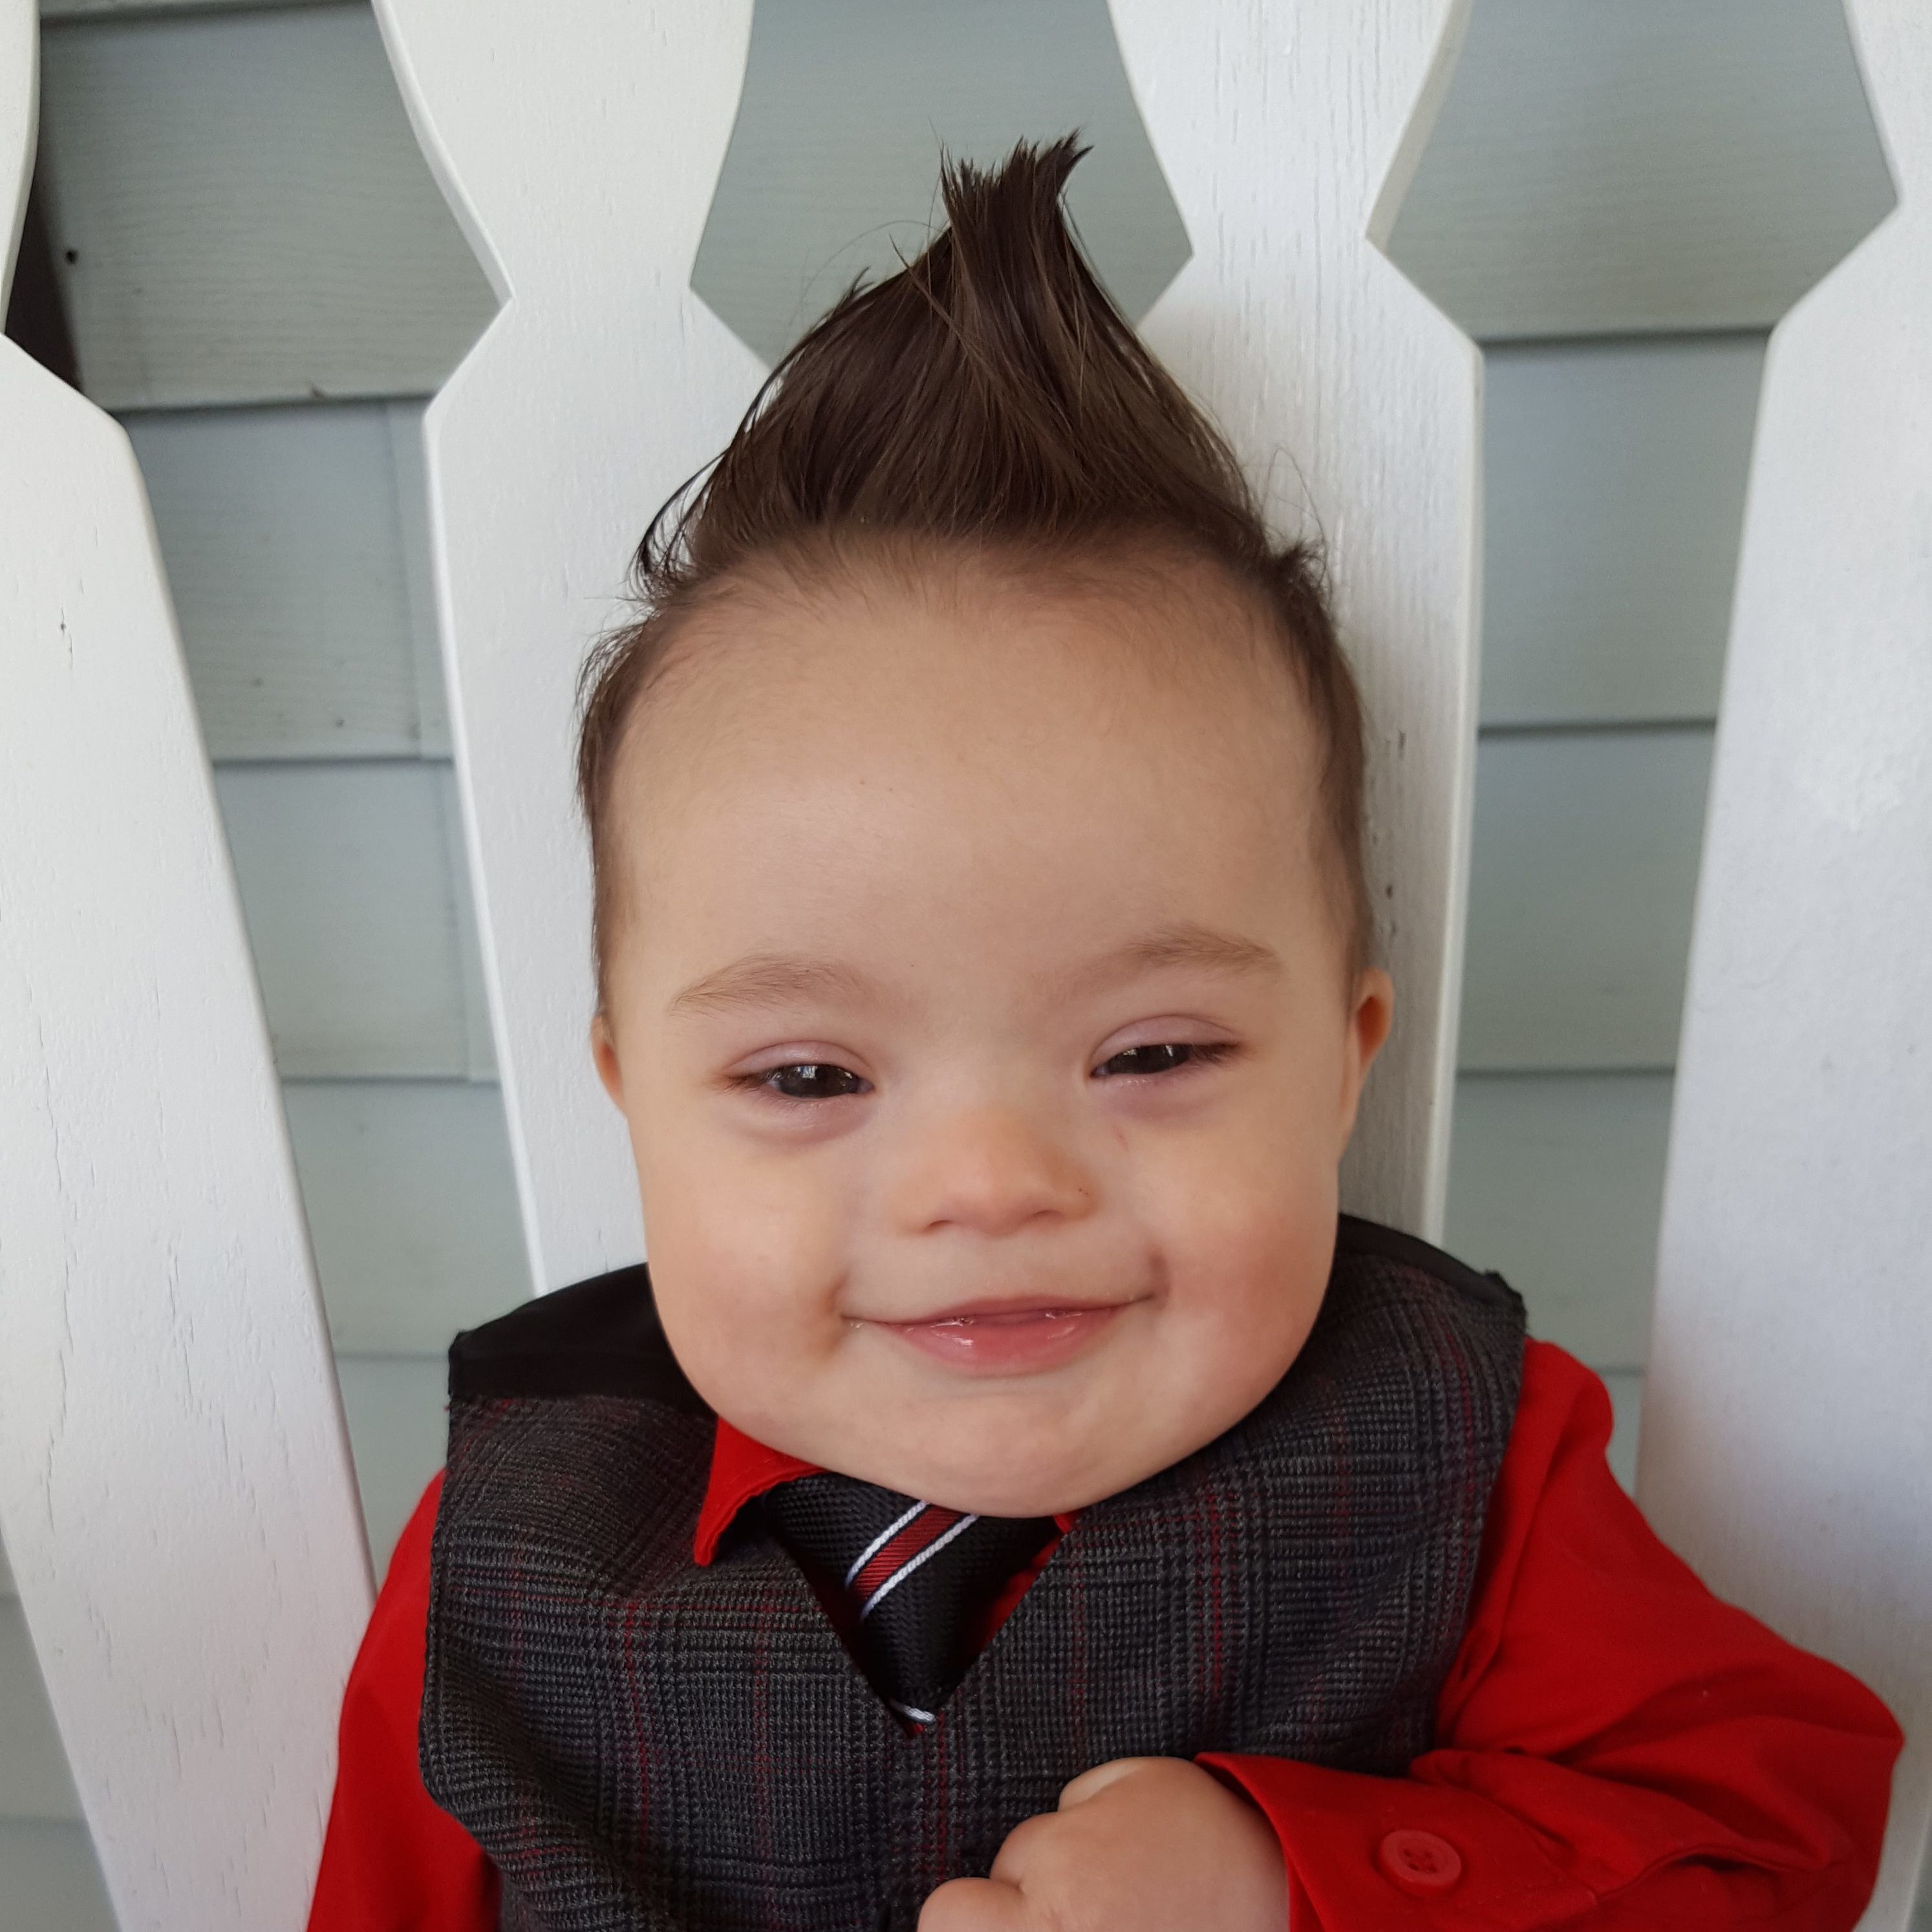 Little baby boy with Down syndrome smiling, his thicj dark hair is styled sticking up like a Mohawk and he is wearing a suit with a red shirt